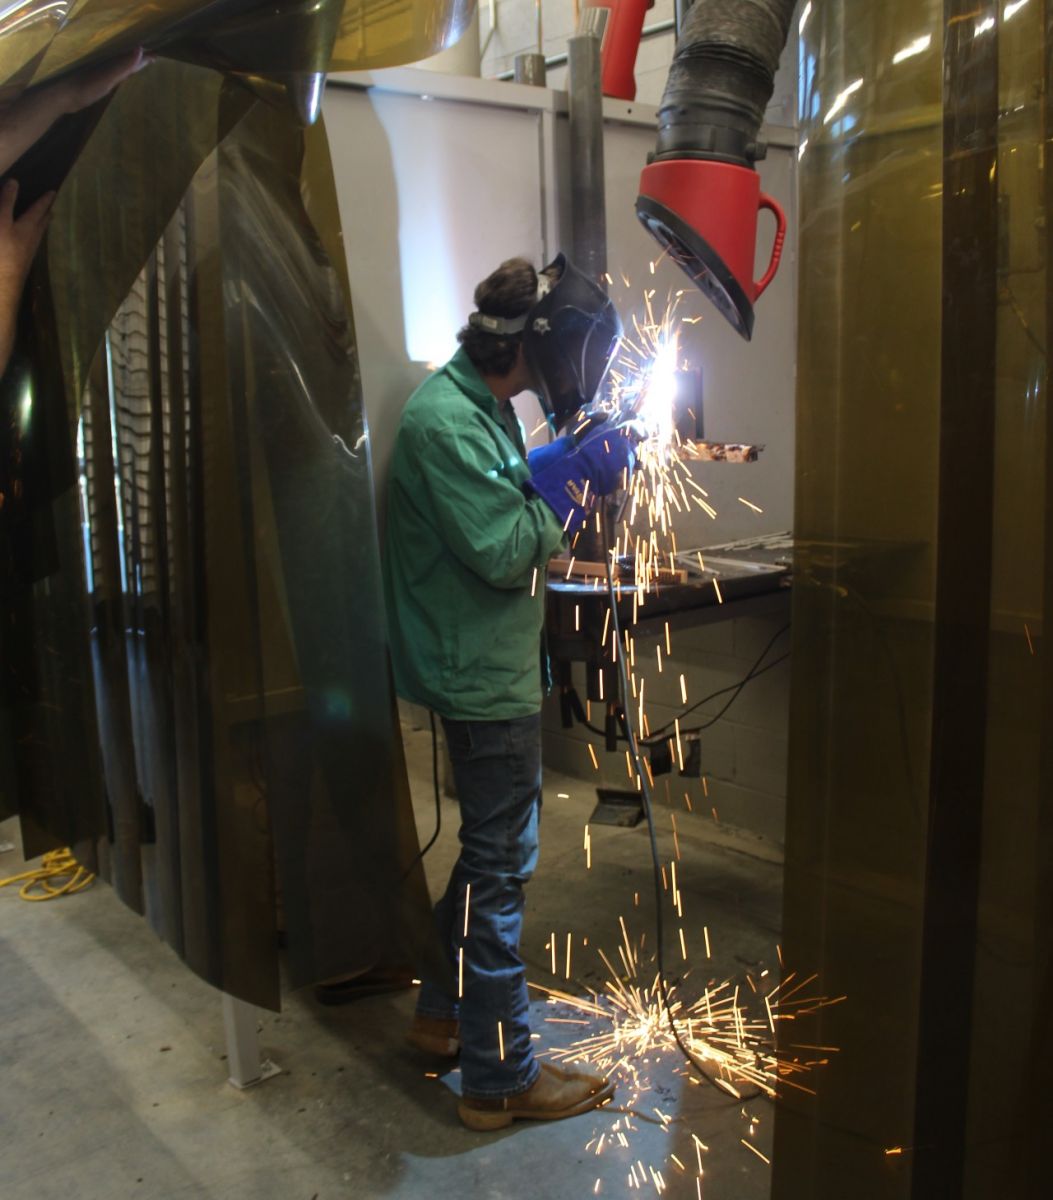 More than 40 high school students from 11 schools around the state took part in MTC‰Ûªs first-ever South Carolina High School Welding Skills Competition on Feb. 25. (Photo/Christina Lee Knauss)